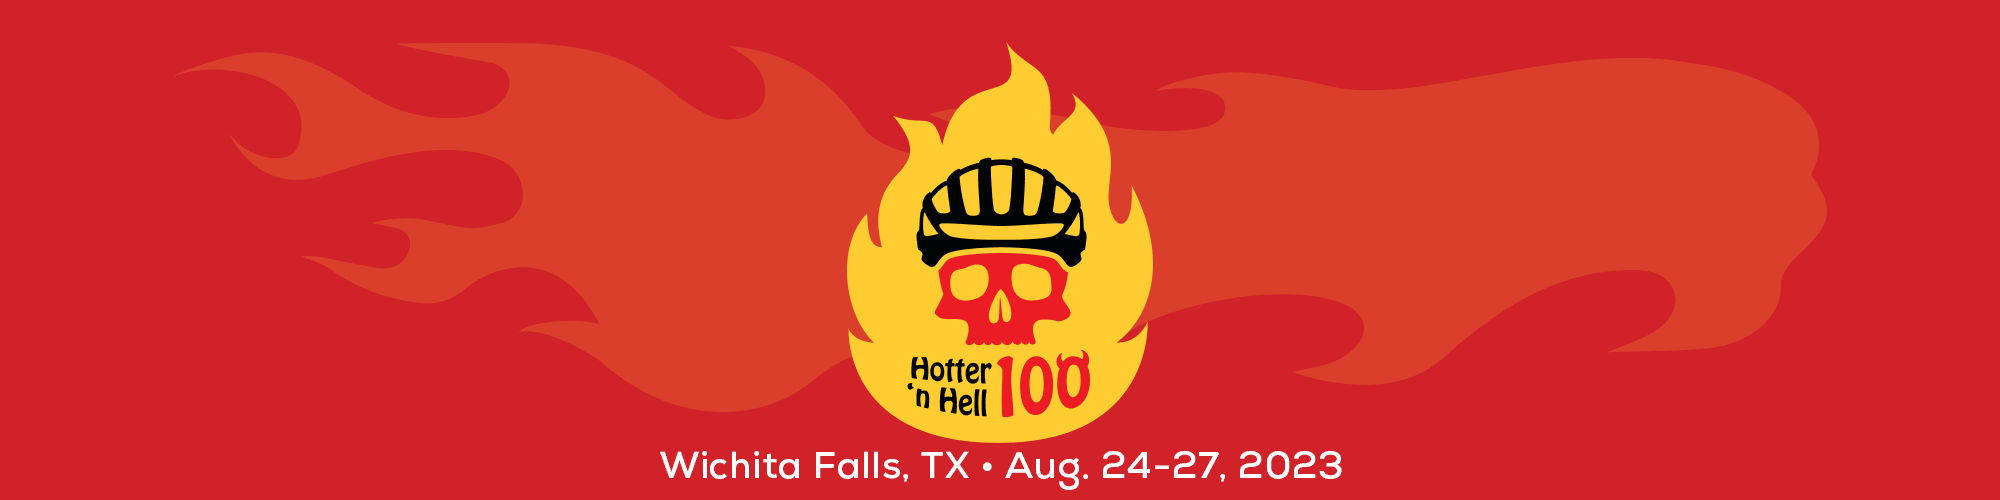 Hotter'N Hell 100. Come See Us At The Expo August 24-27, 2023 in Wichita Falls Tx.